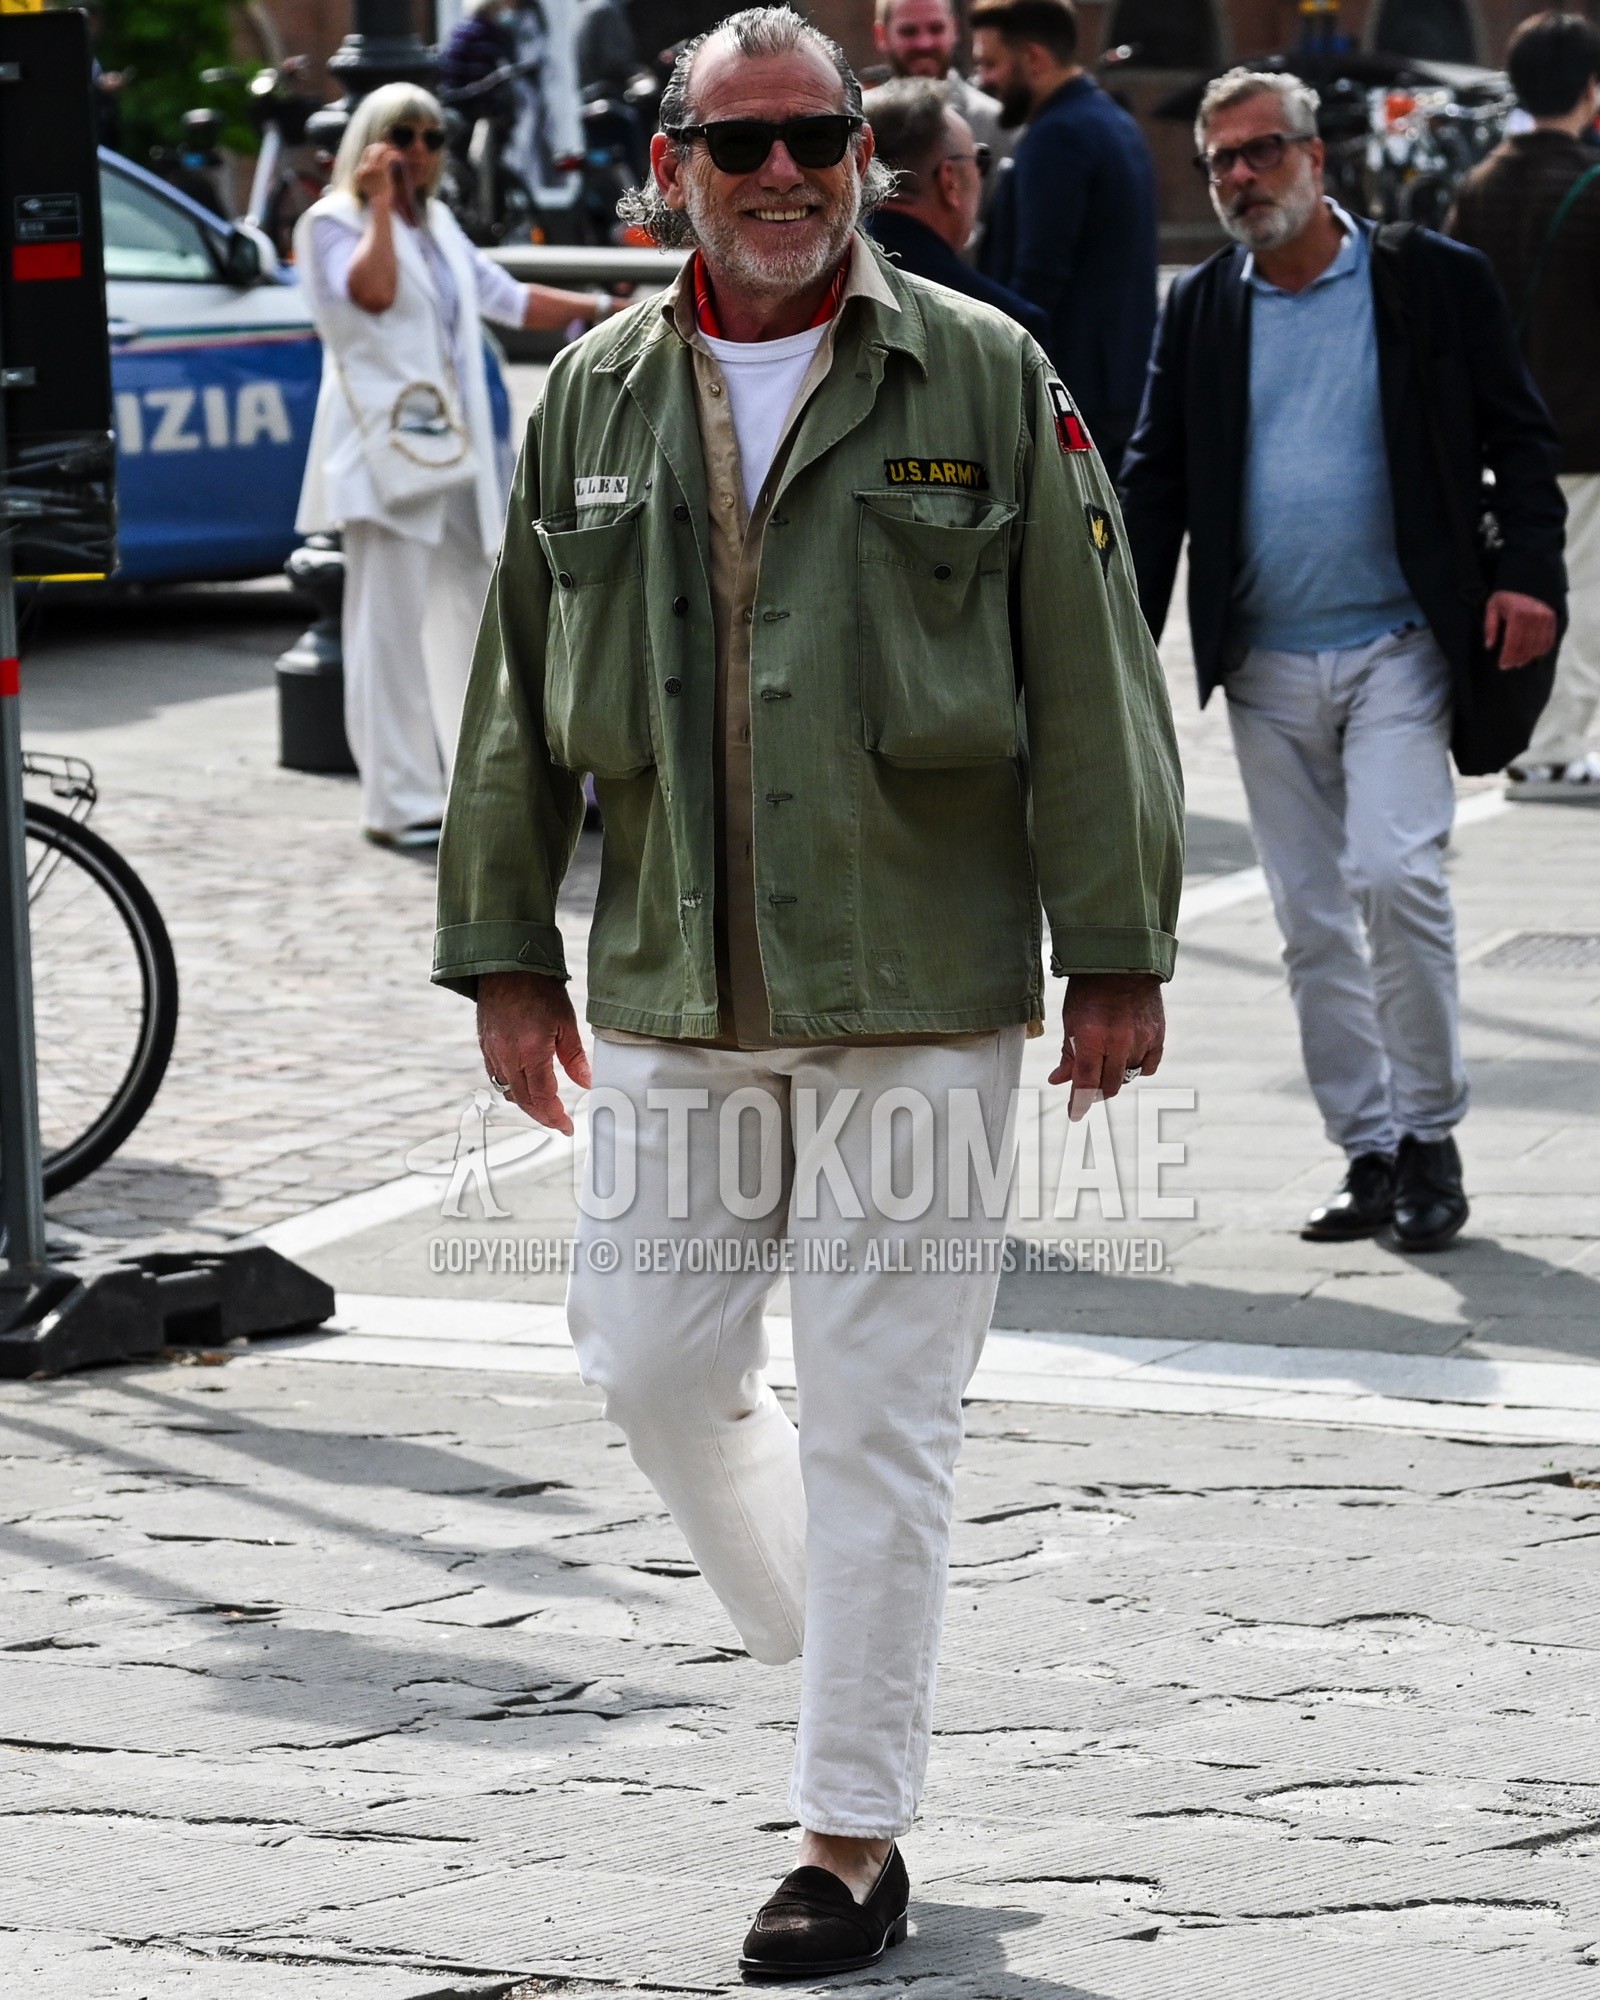 Men's spring summer autumn outfit with black plain sunglasses, red whole pattern bandana/neckerchief, olive green one point military jacket, beige plain shirt, white plain t-shirt, white plain chinos, brown coin loafers leather shoes.